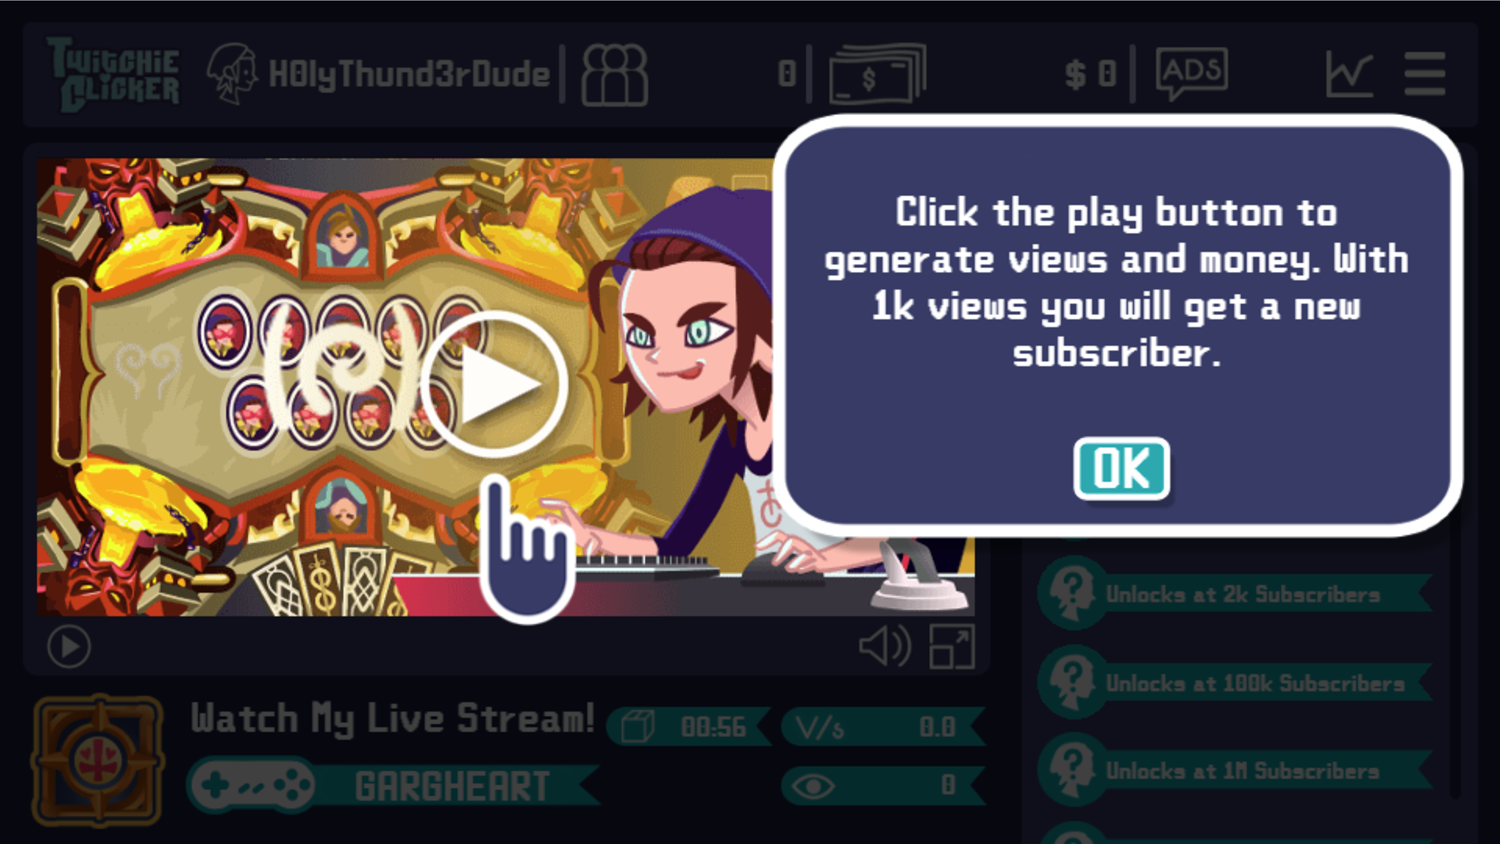 Twitchie Clicker Game Generate Views and Money Instructions Screen Screenshot.